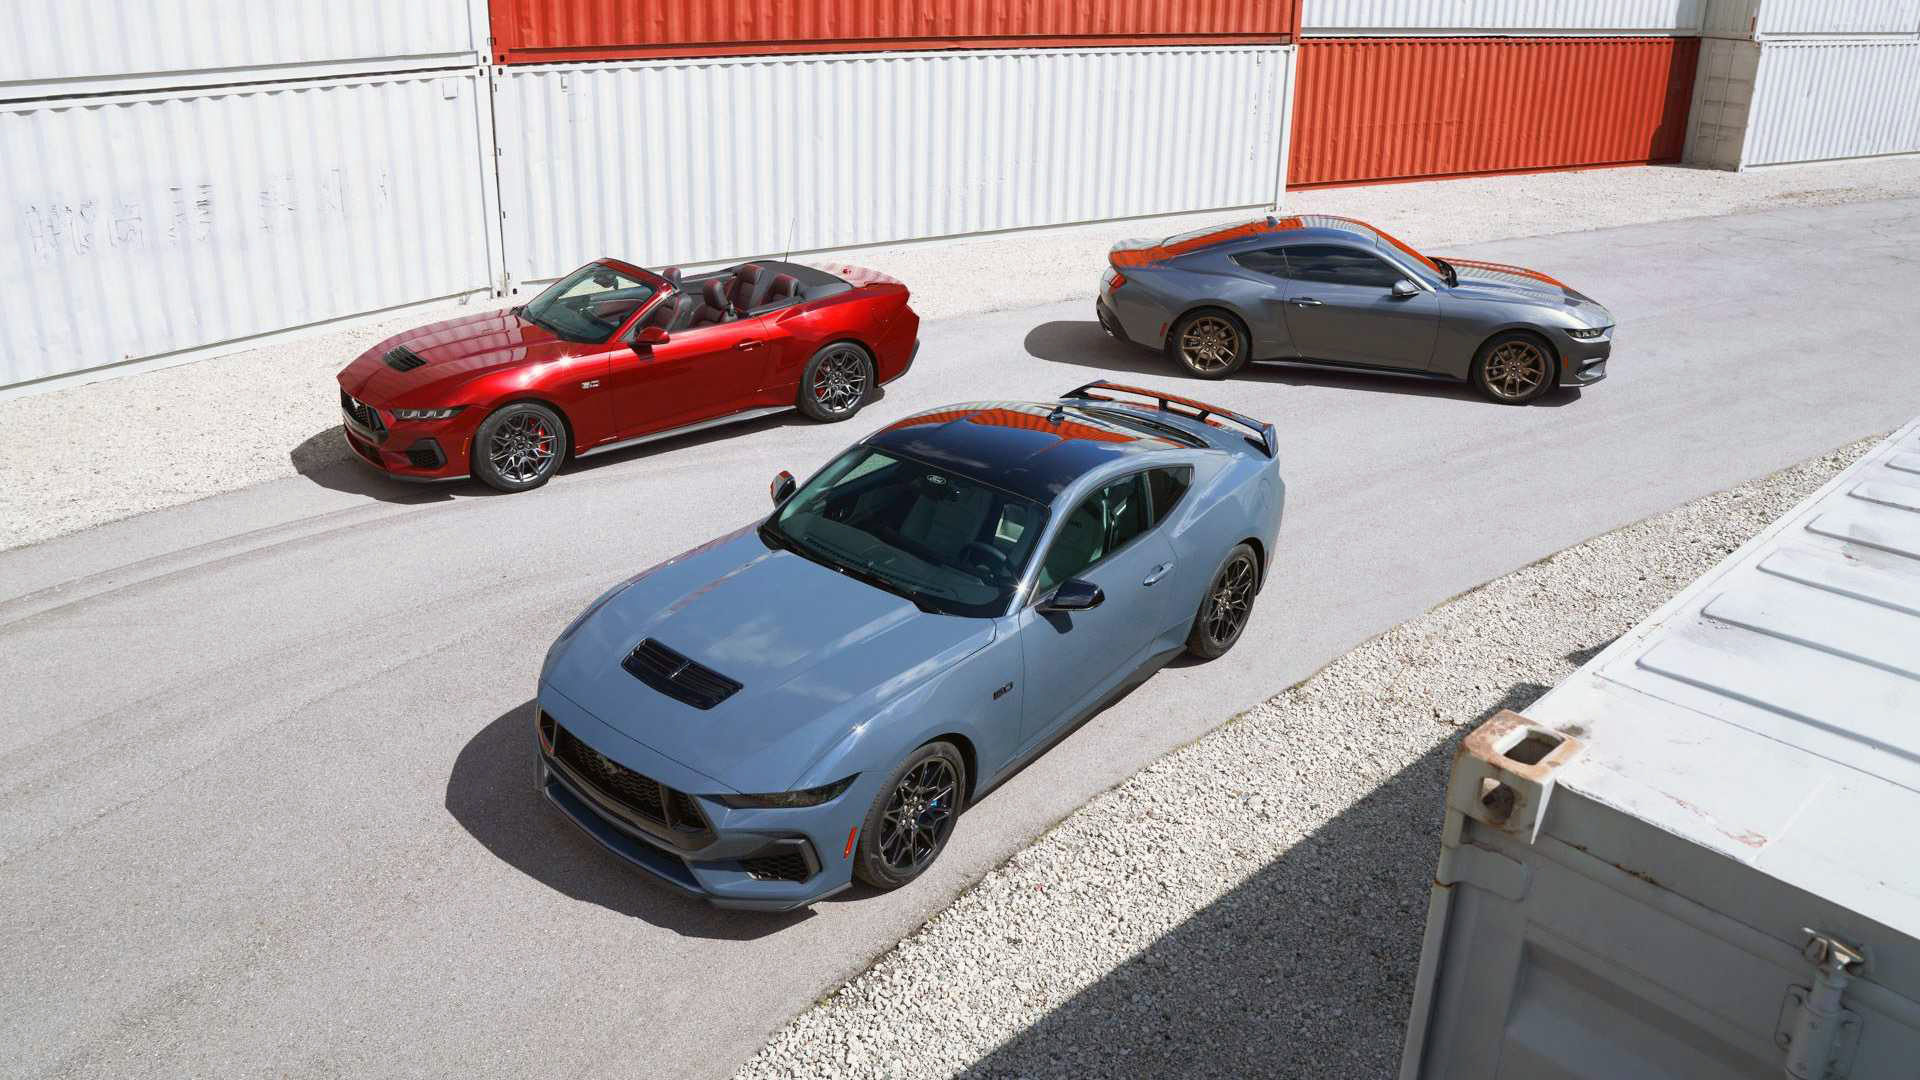 Three versions of the new Mustang.  A 5-liter Coyote V8, 4-cylinder EcoBoost and convertible form the base of the Generation 7.